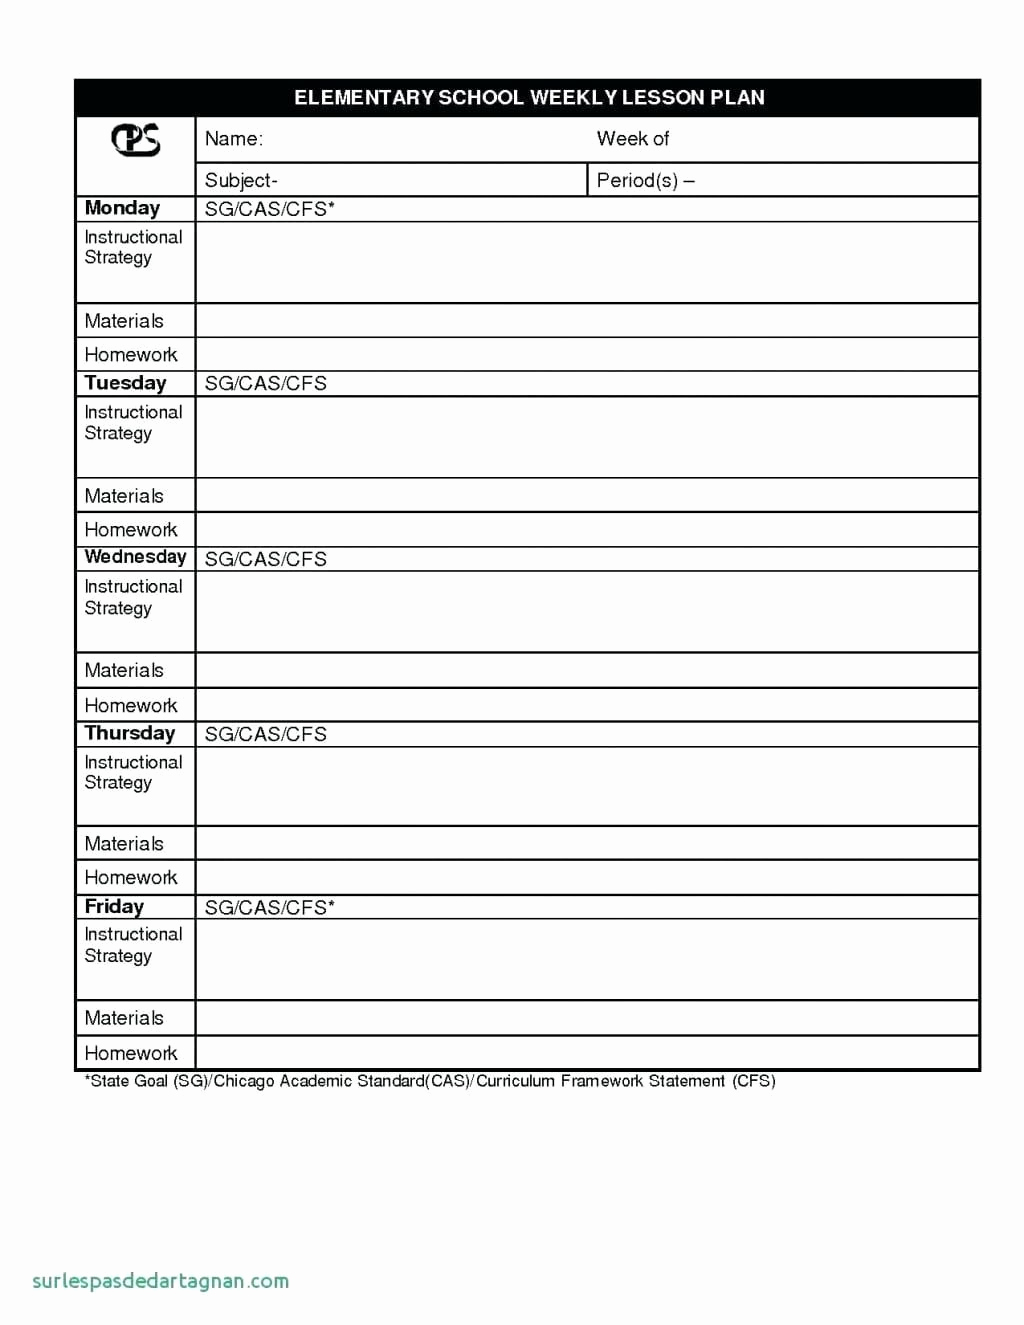 Scientific Method Worksheets 5th Grade Awesome 20 Scientific Method Worksheets 5th Grade